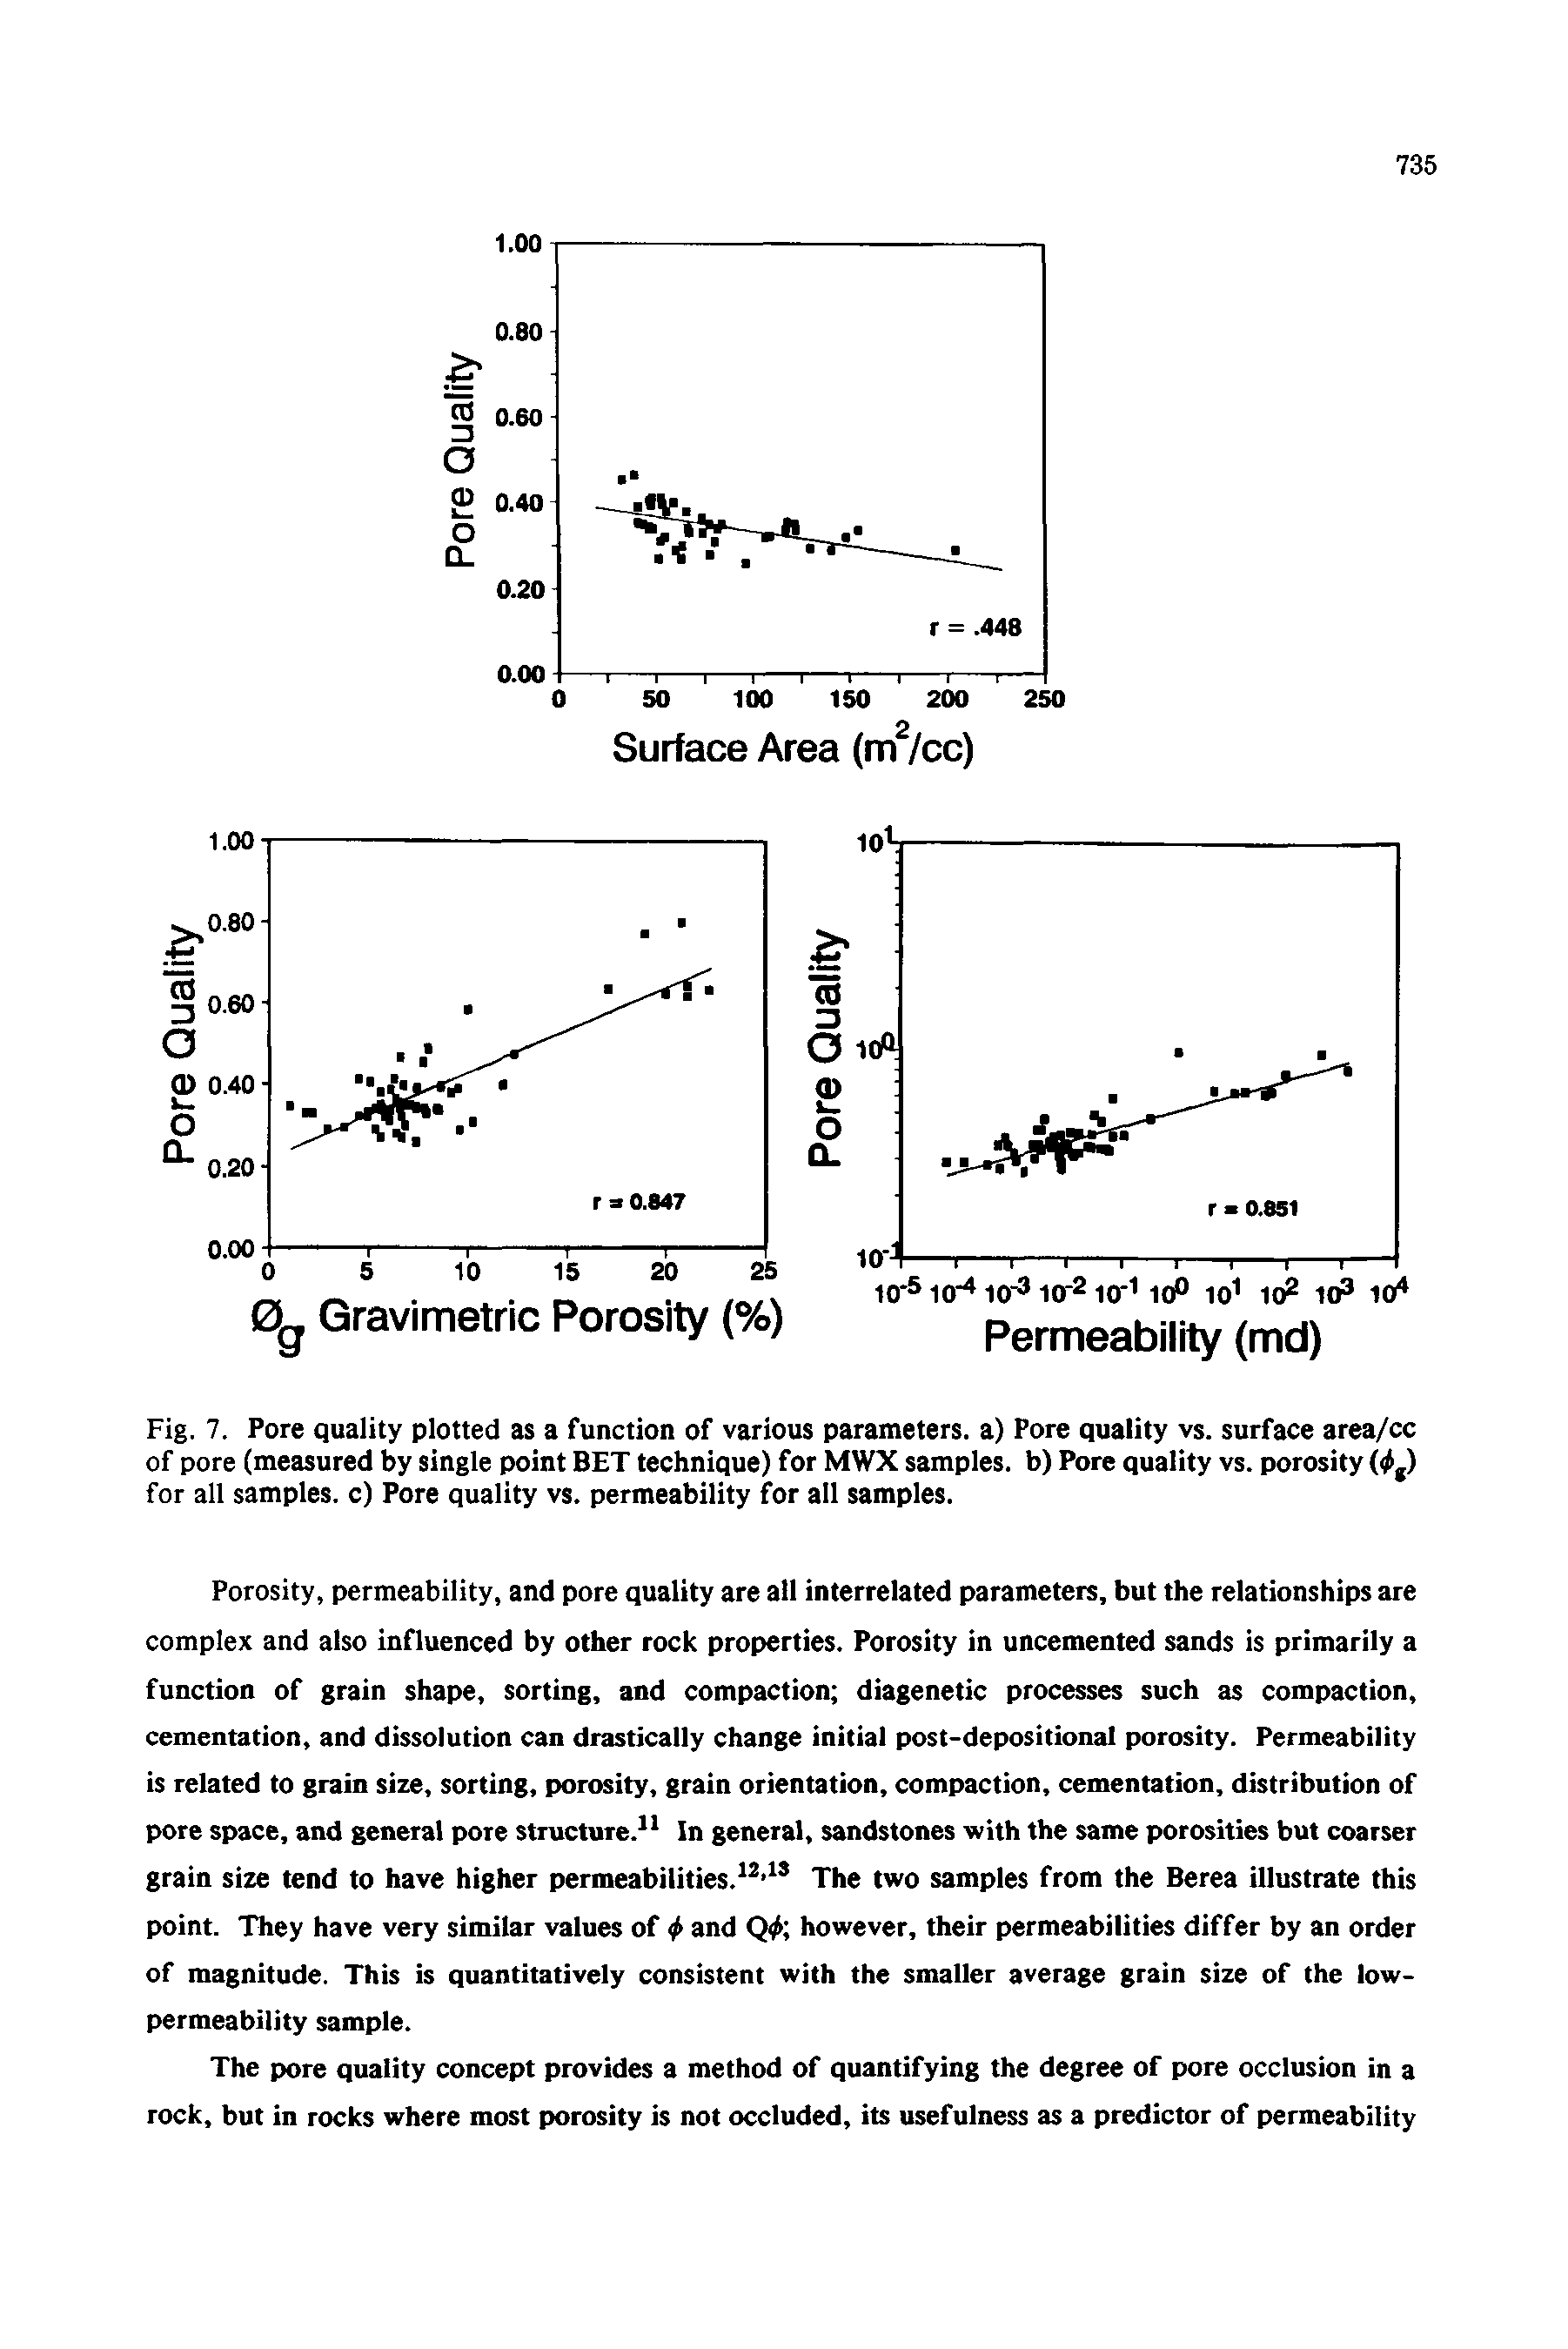 Fig. 7. Pore quality plotted as a function of various parameters, a) Pore quality vs. surface area/cc of pore (measured by single point BET technique) for MWX samples, b) Pore quality vs. porosity for all samples, c) Pore quality vs. permeability for all samples.